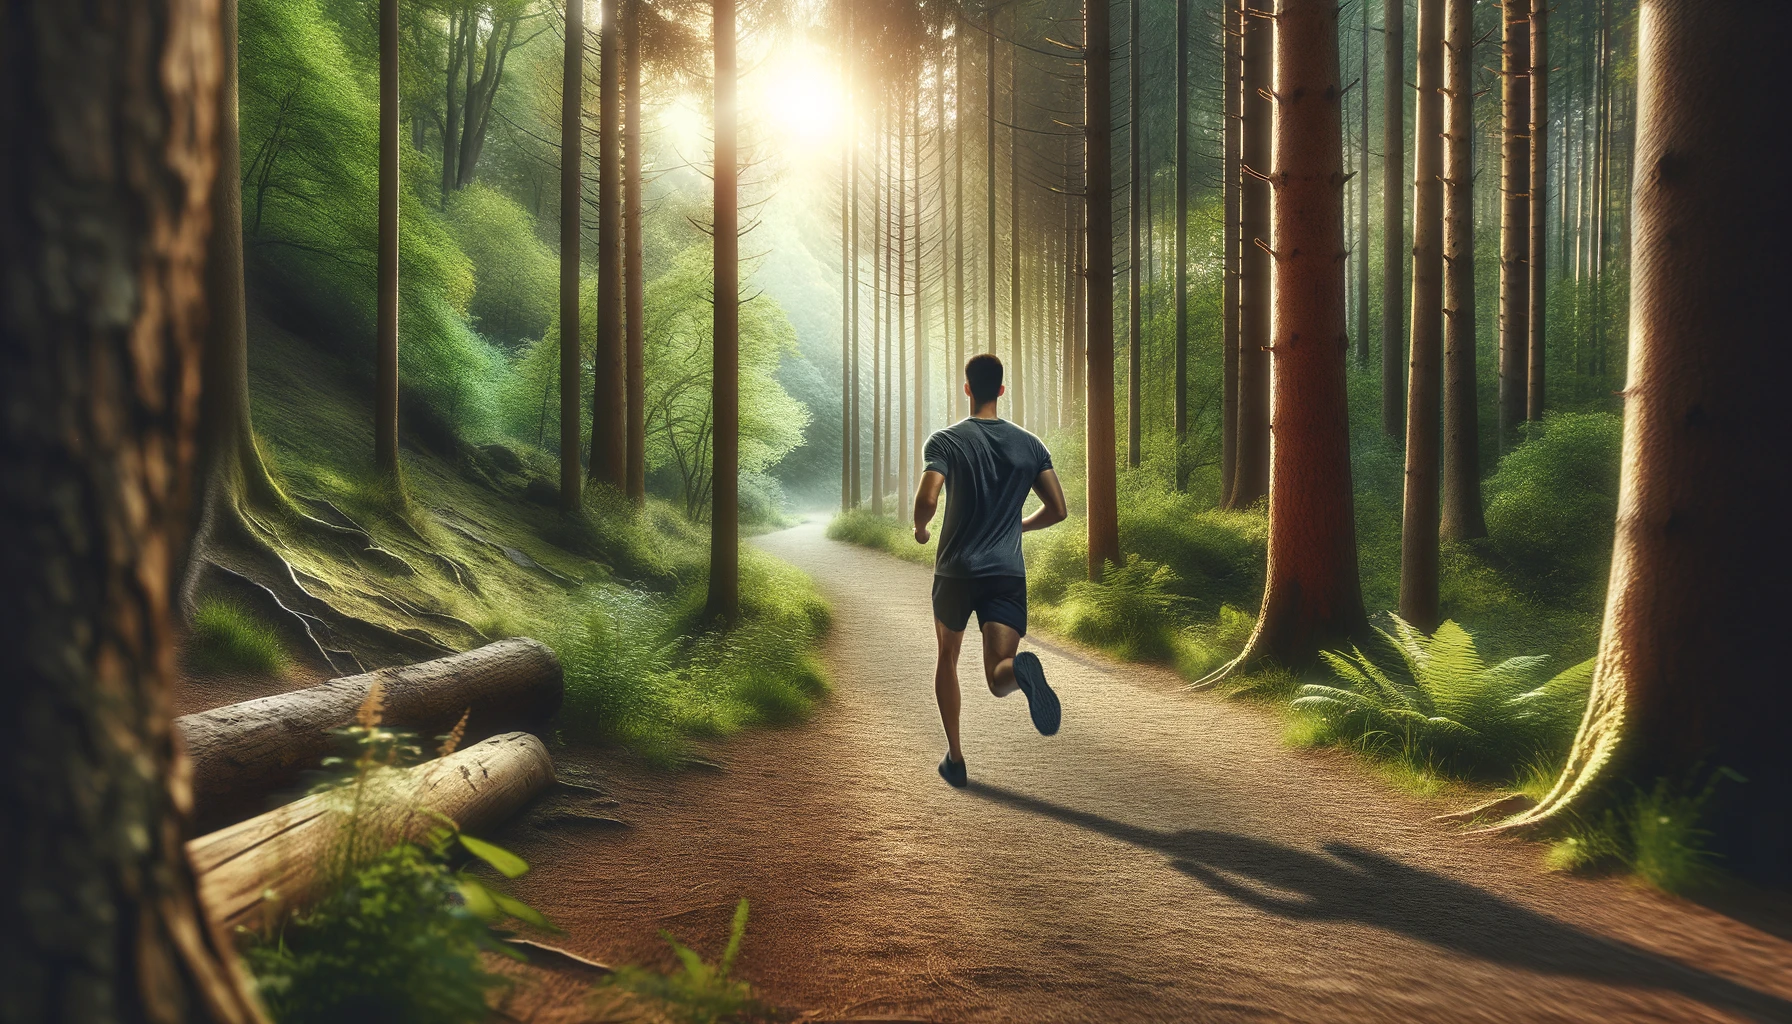 Outdoor Workouts-A man jogs along a natural trail in a forest.